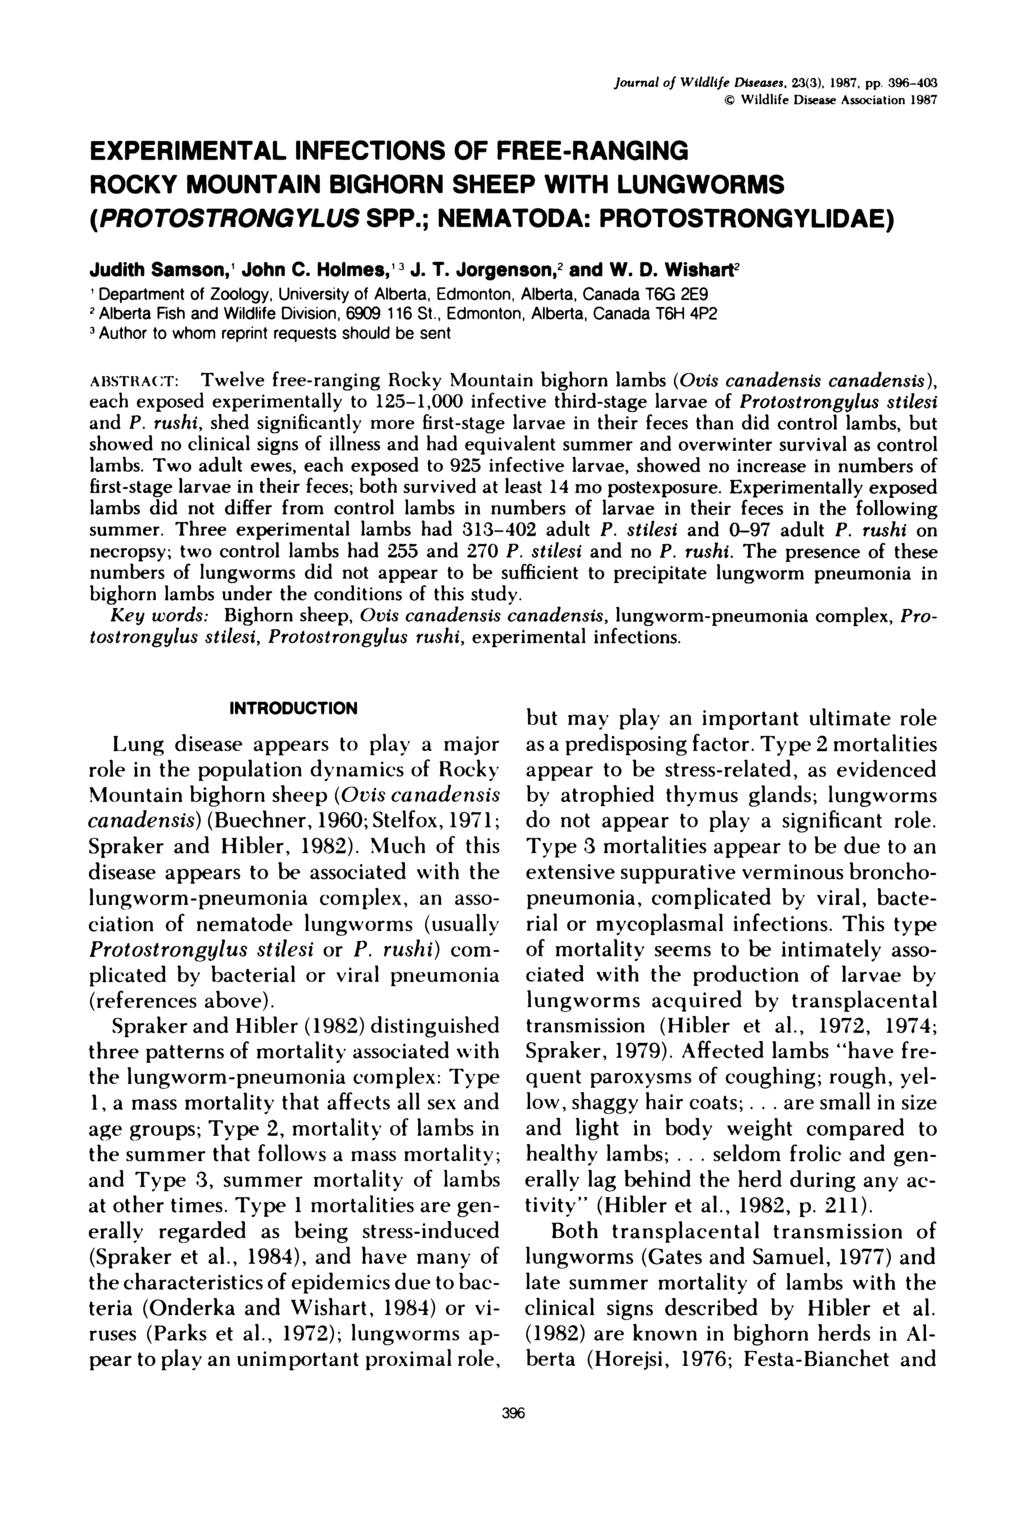 Journal of Wildlife DIseases. 2(), 1987, pp. 94 Wildlife Disease Association 1987 EXPERIMENTAL INFECTIONS OF FREERANGING ROCKY MOUNTAIN BIGHORN SHEEP WITH LUNGWORMS (PROTOSTRONGYLUS SPP.